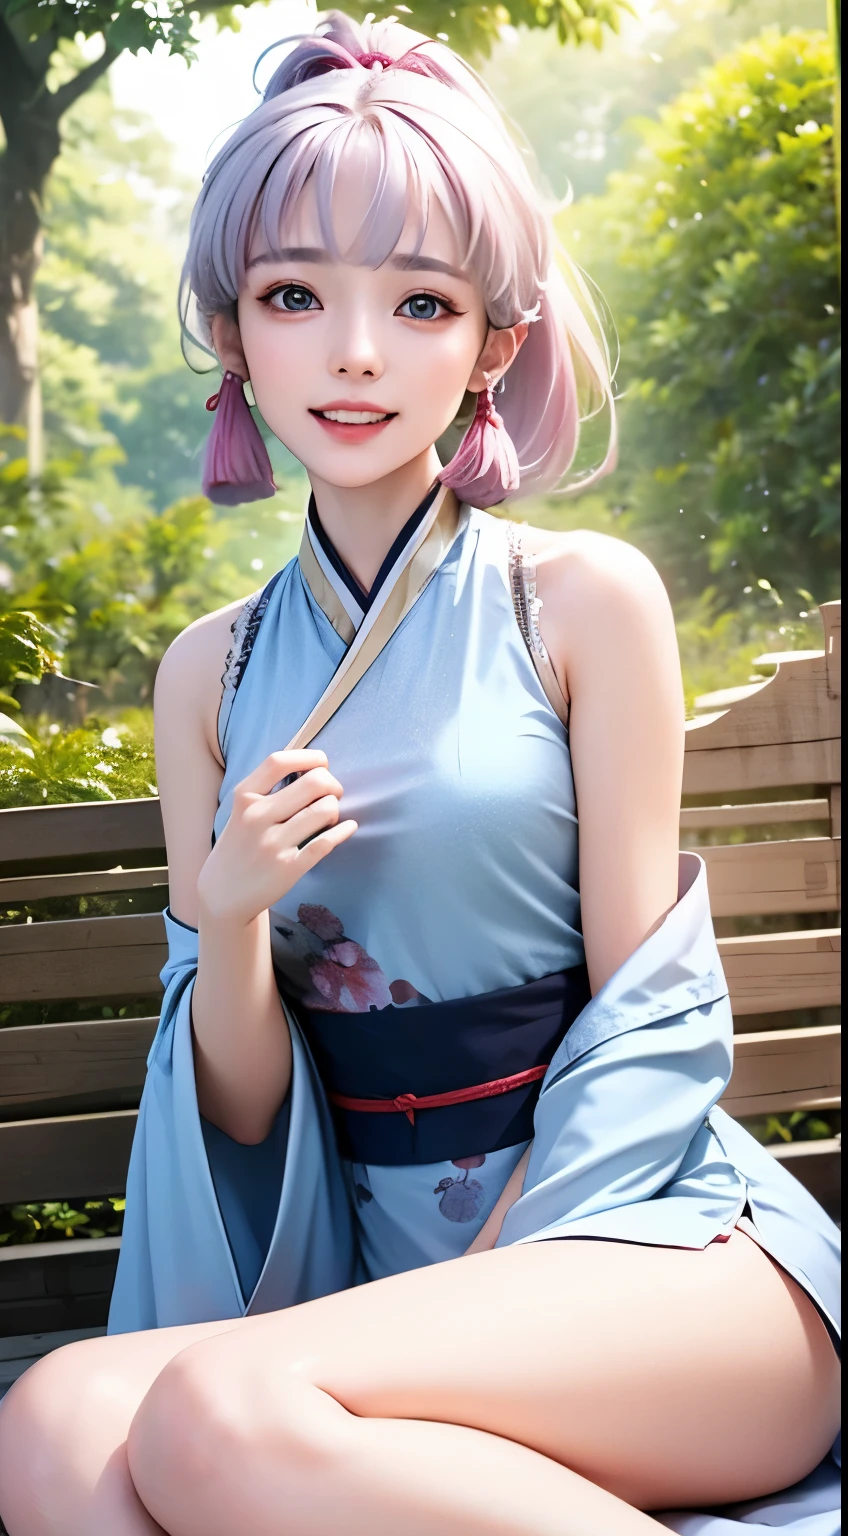 Best quality at best，tmasterpiece，Extremely Delicately Beautiful，The content is very detailed，CG，gatherings，8k wallpaper，An Astonishing，depth of fields，A 10-year-old Chinese girl，Wearing Chinese Hanfu，very beautiful clothes，Sitting in the maple forest，Red maple leaves in the air，Very cute look，Innocent，delicate skin，Flawless Face，plain face，White hair，medium length gray hair，high ponytails，There are two strands of white hair on both sides of the ears，Wear pink hair accessories，skyblue eyes，Elaborate Eyes，Eyes sparkle，laughing very happily